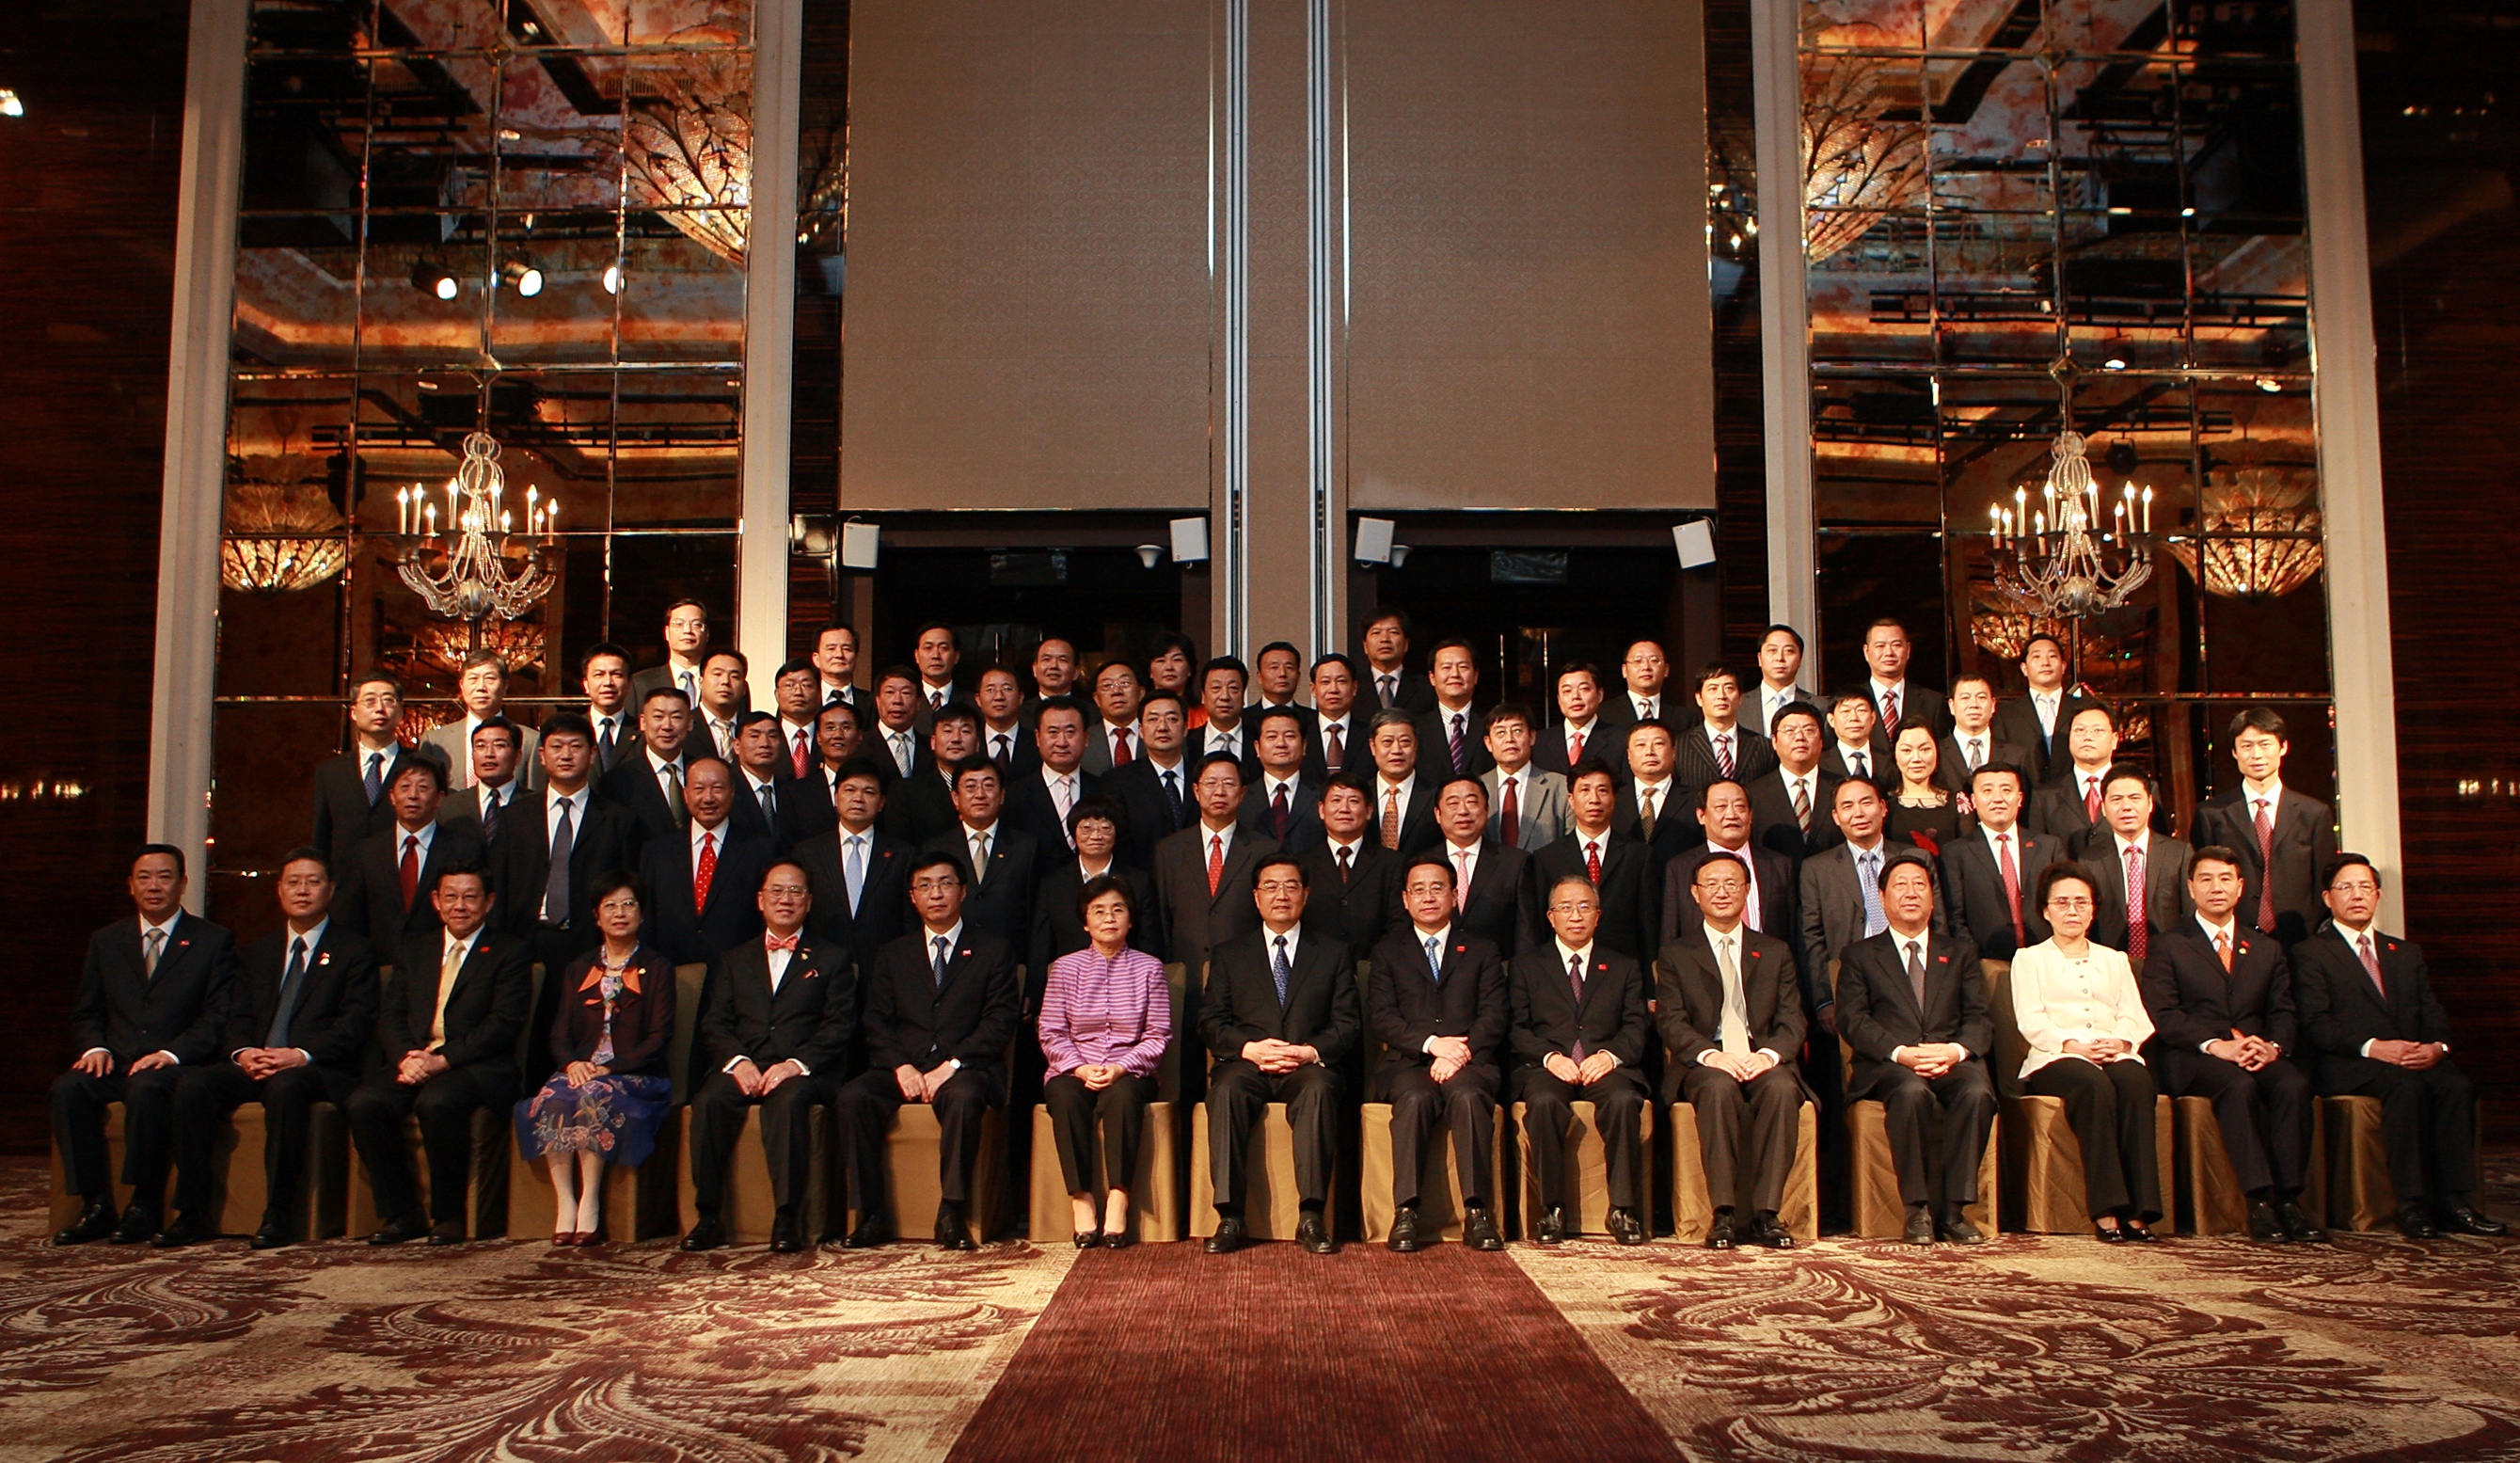 A photo from the 2009 APEC summit with both President Hu Jintao and Group President Bin Chen